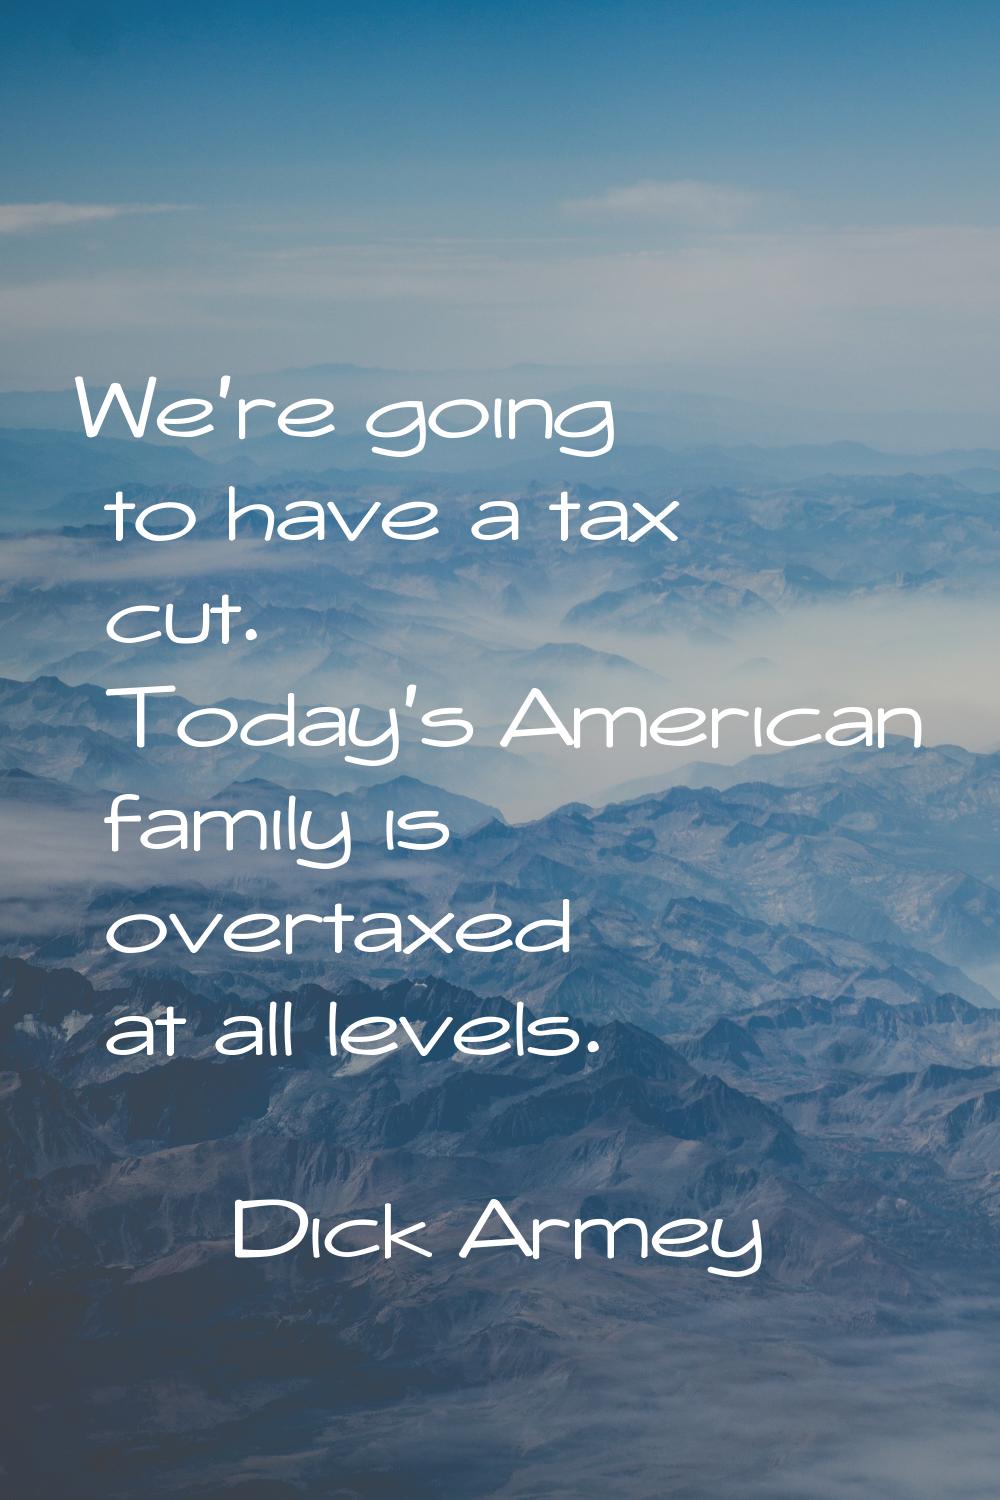 We're going to have a tax cut. Today's American family is overtaxed at all levels.